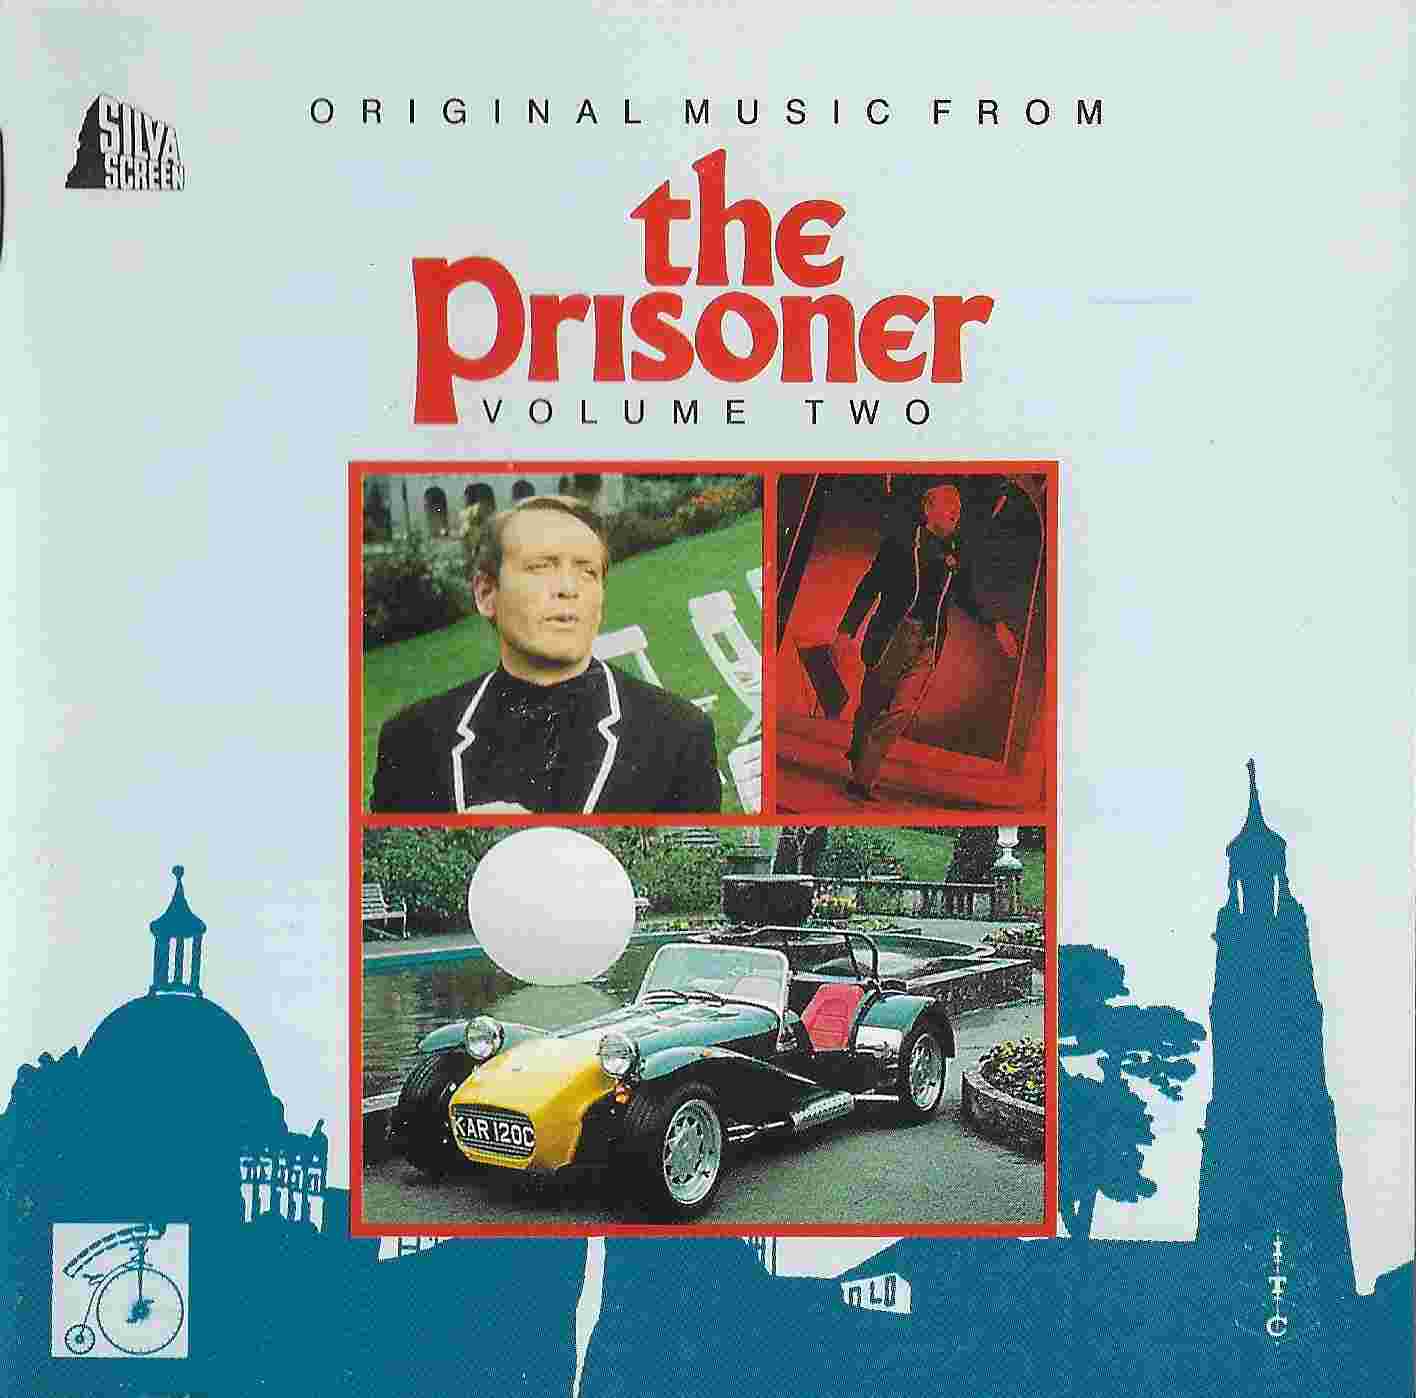 Picture of The prisoner - Volume 2 by artist Various from ITV, Channel 4 and Channel 5 cds library